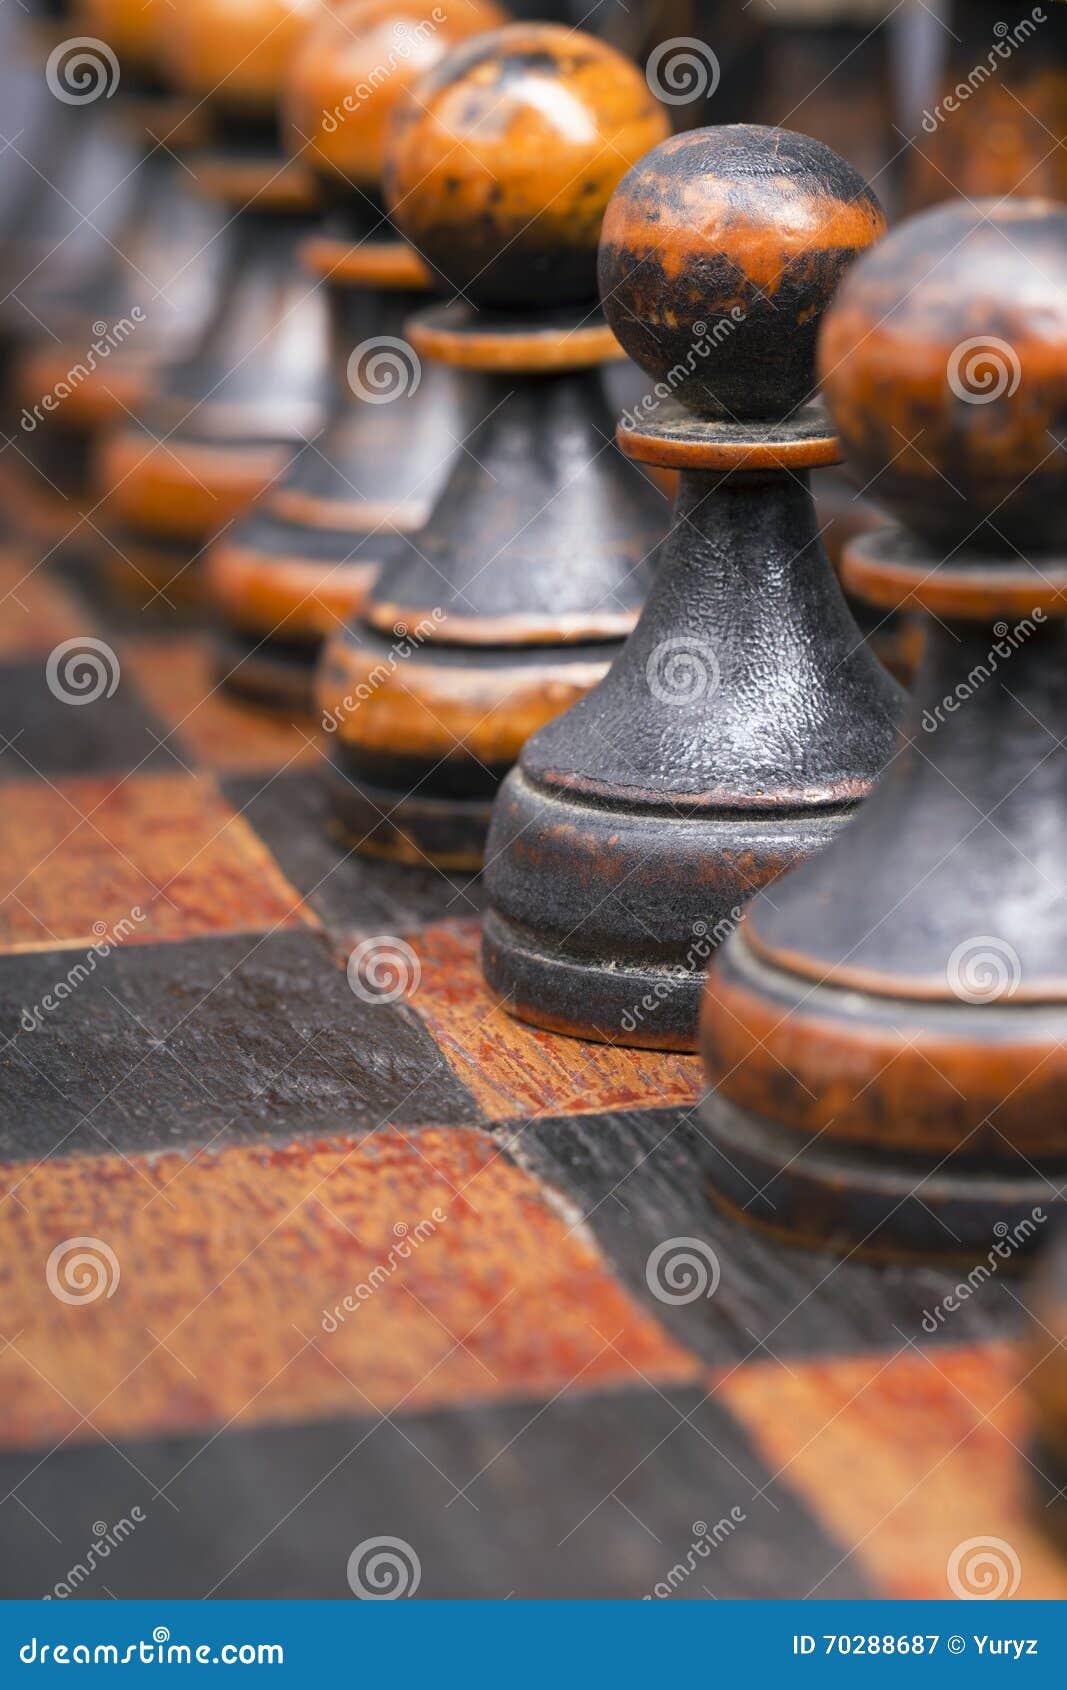 Image of chess game. Businessman looking at compass and pawns